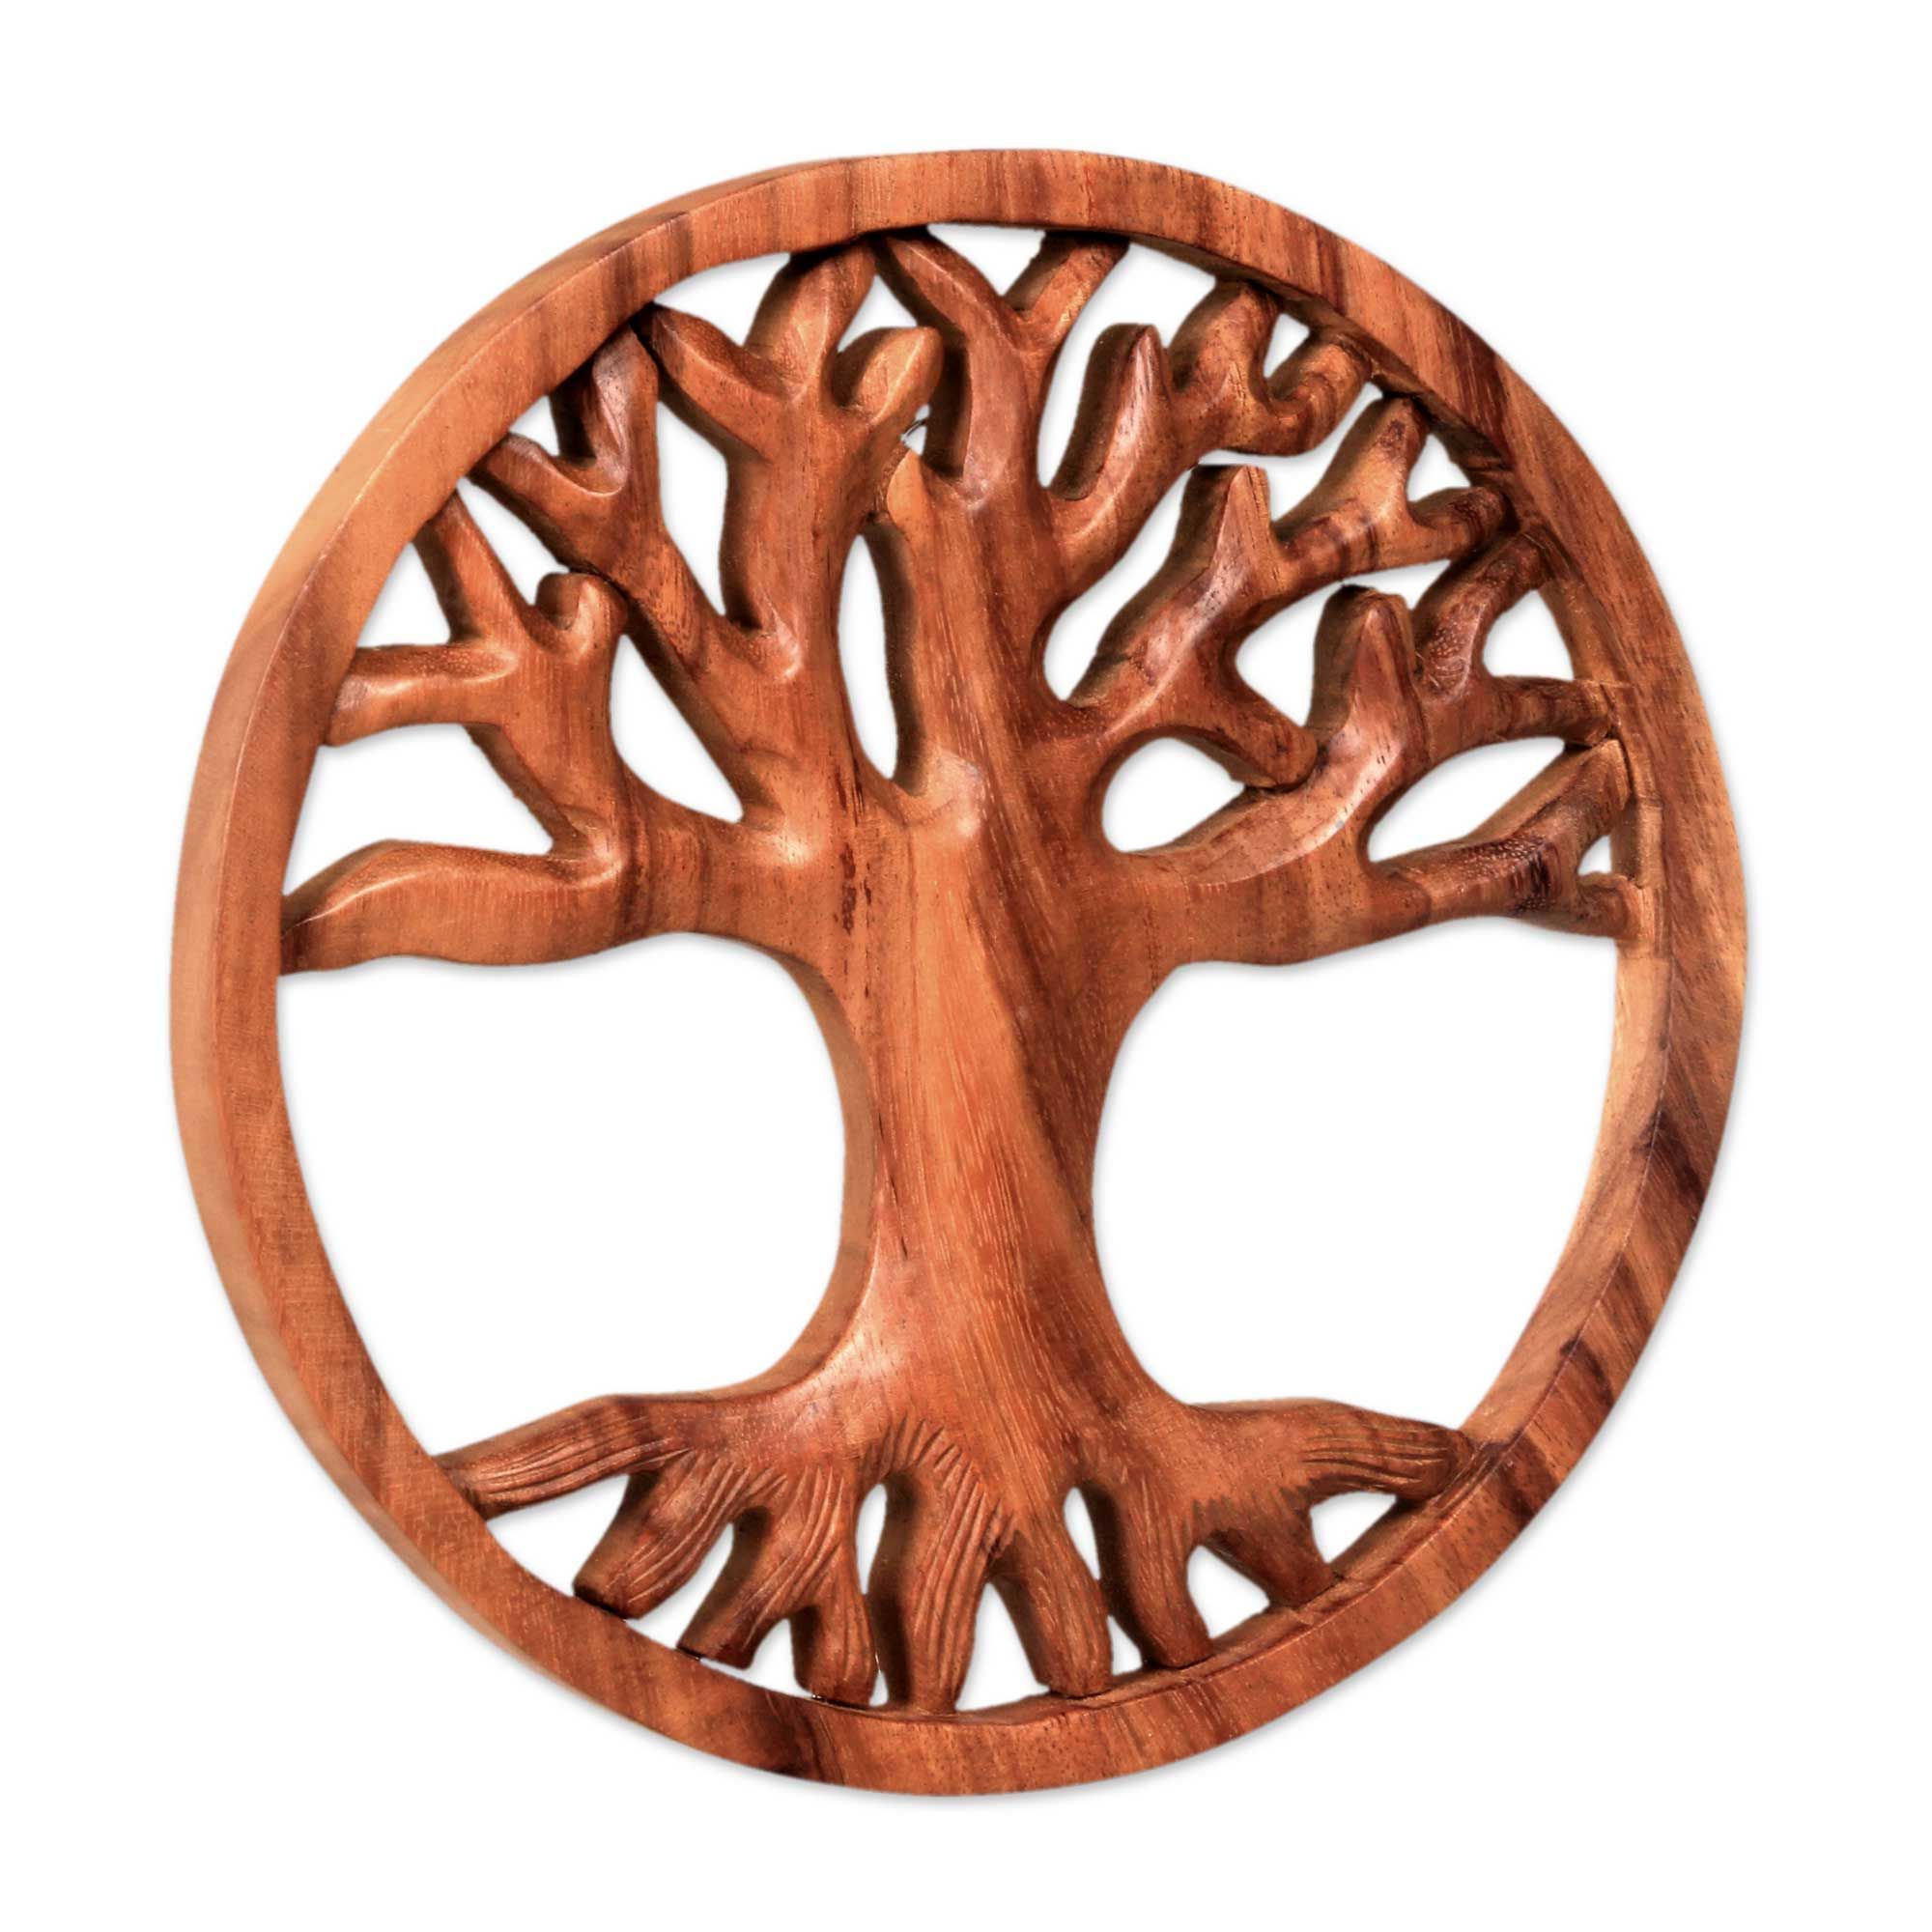 Wood Relief Panel, 'living Tree' | Metal Tree, Metal Tree Wall Art Throughout Most Popular Spiral Circles Metal Wall Art (View 15 of 20)